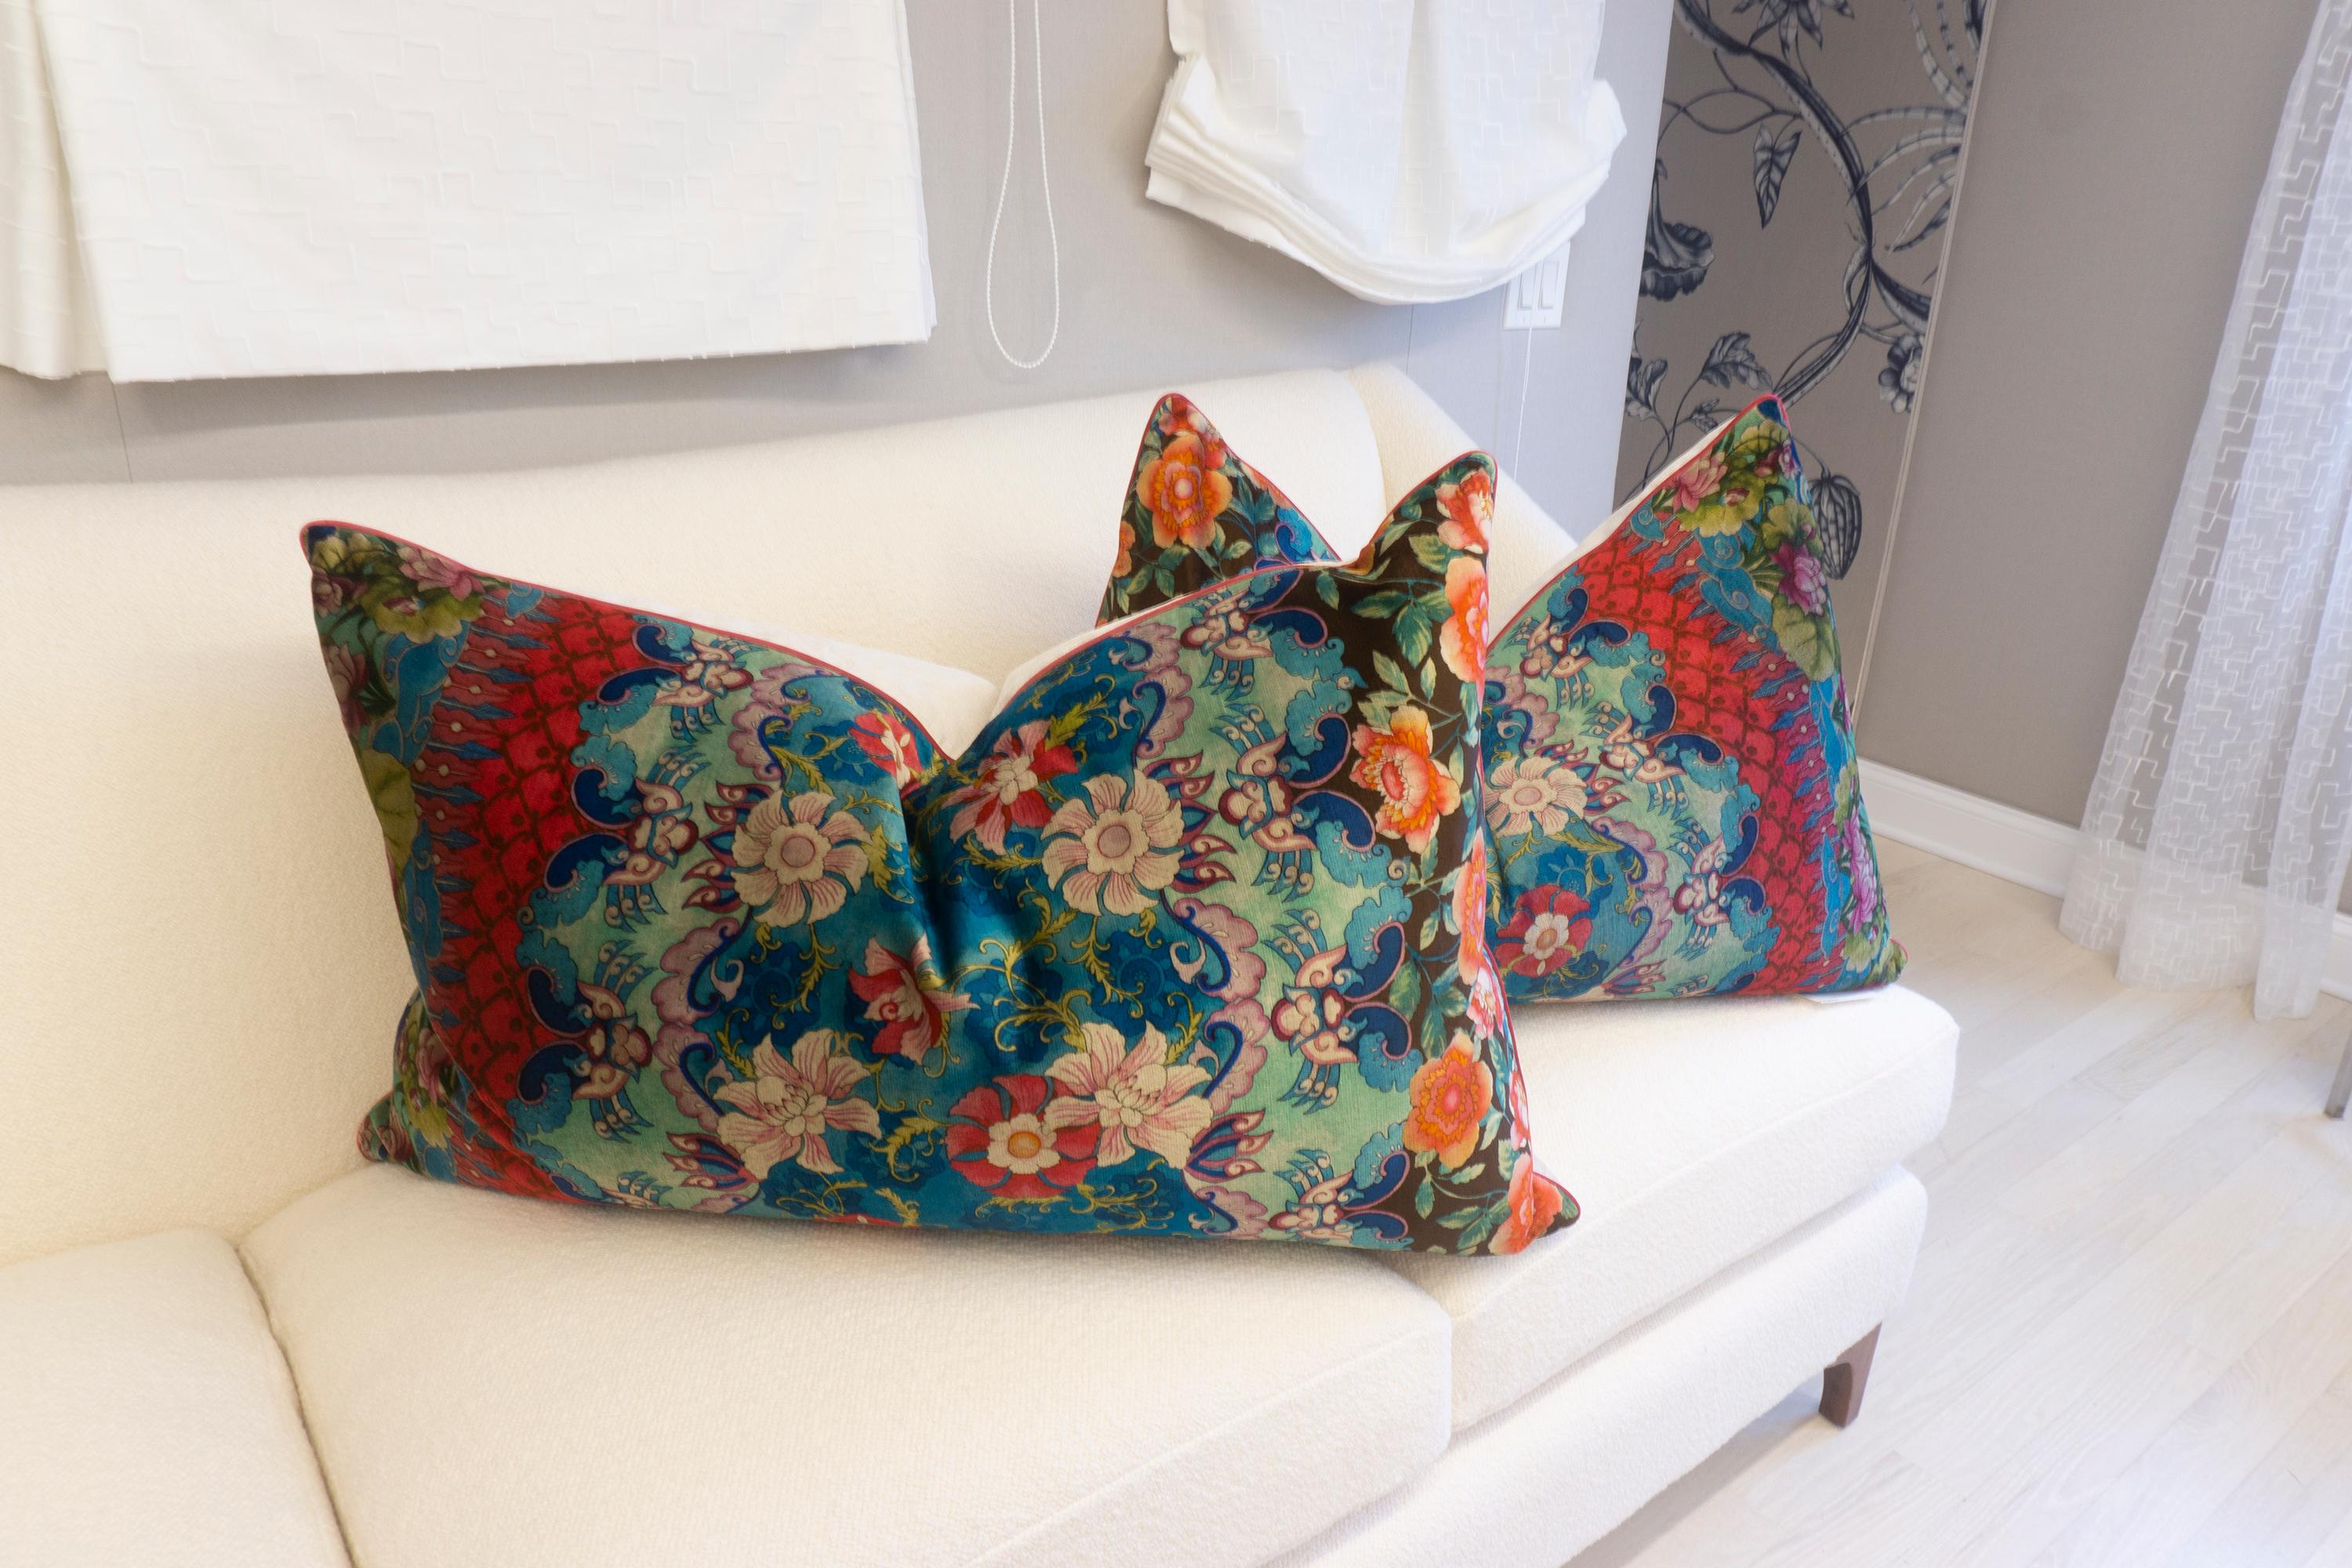 This set of extra large throw pillows were hand sewn at our Studio in Norwalk, Connecticut. These pillows feature a
colorful Mediterranean inspired floral pattern in velvet for the front and an off white chenille for the back. The pillows are